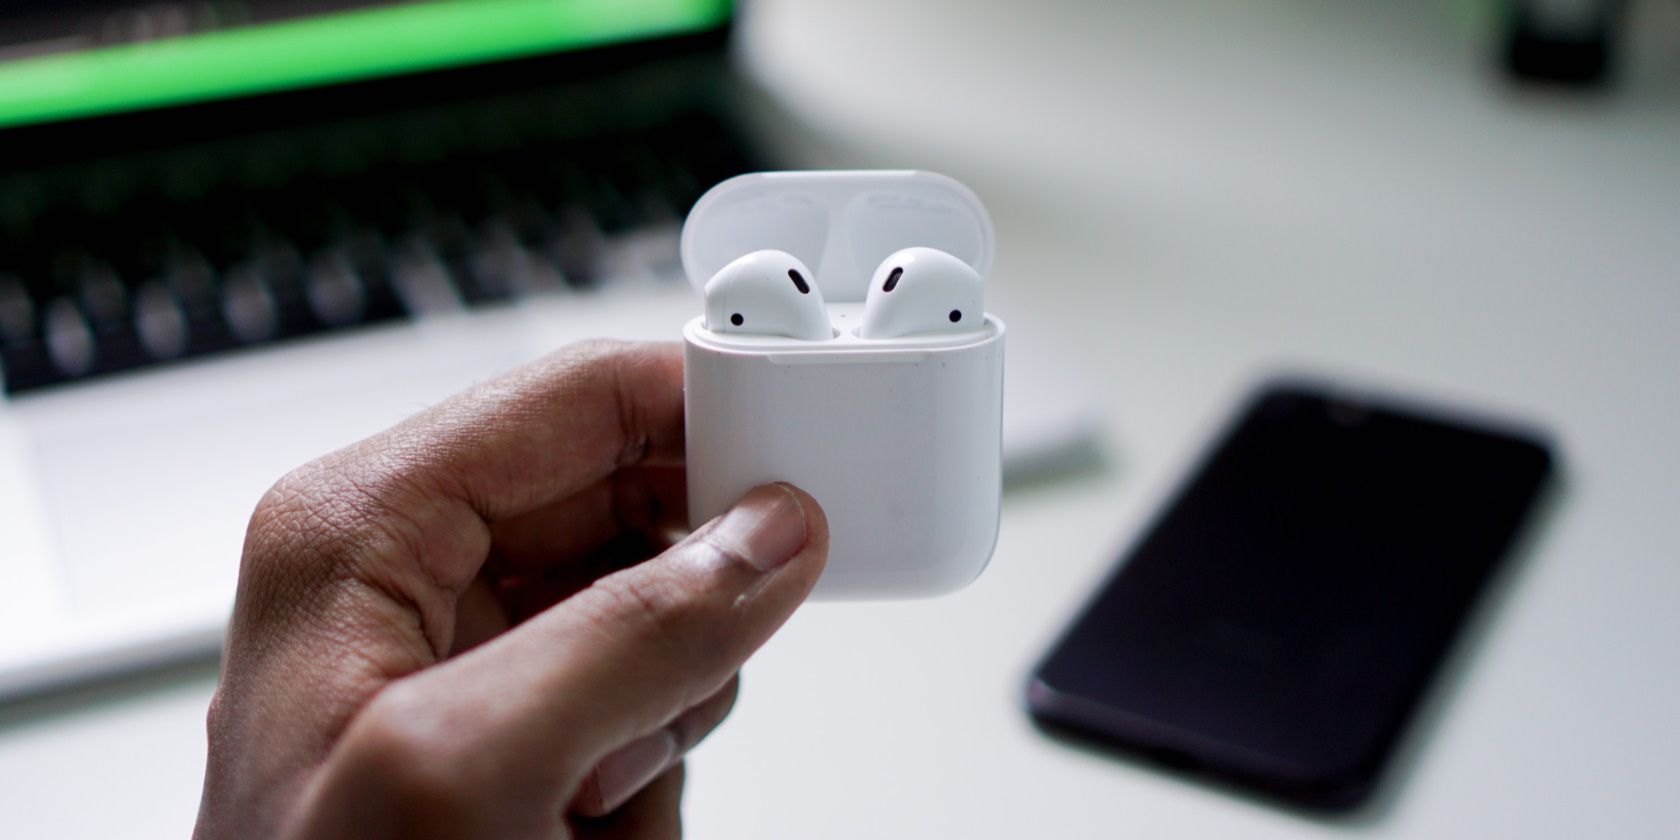 How to find stolen AirPods